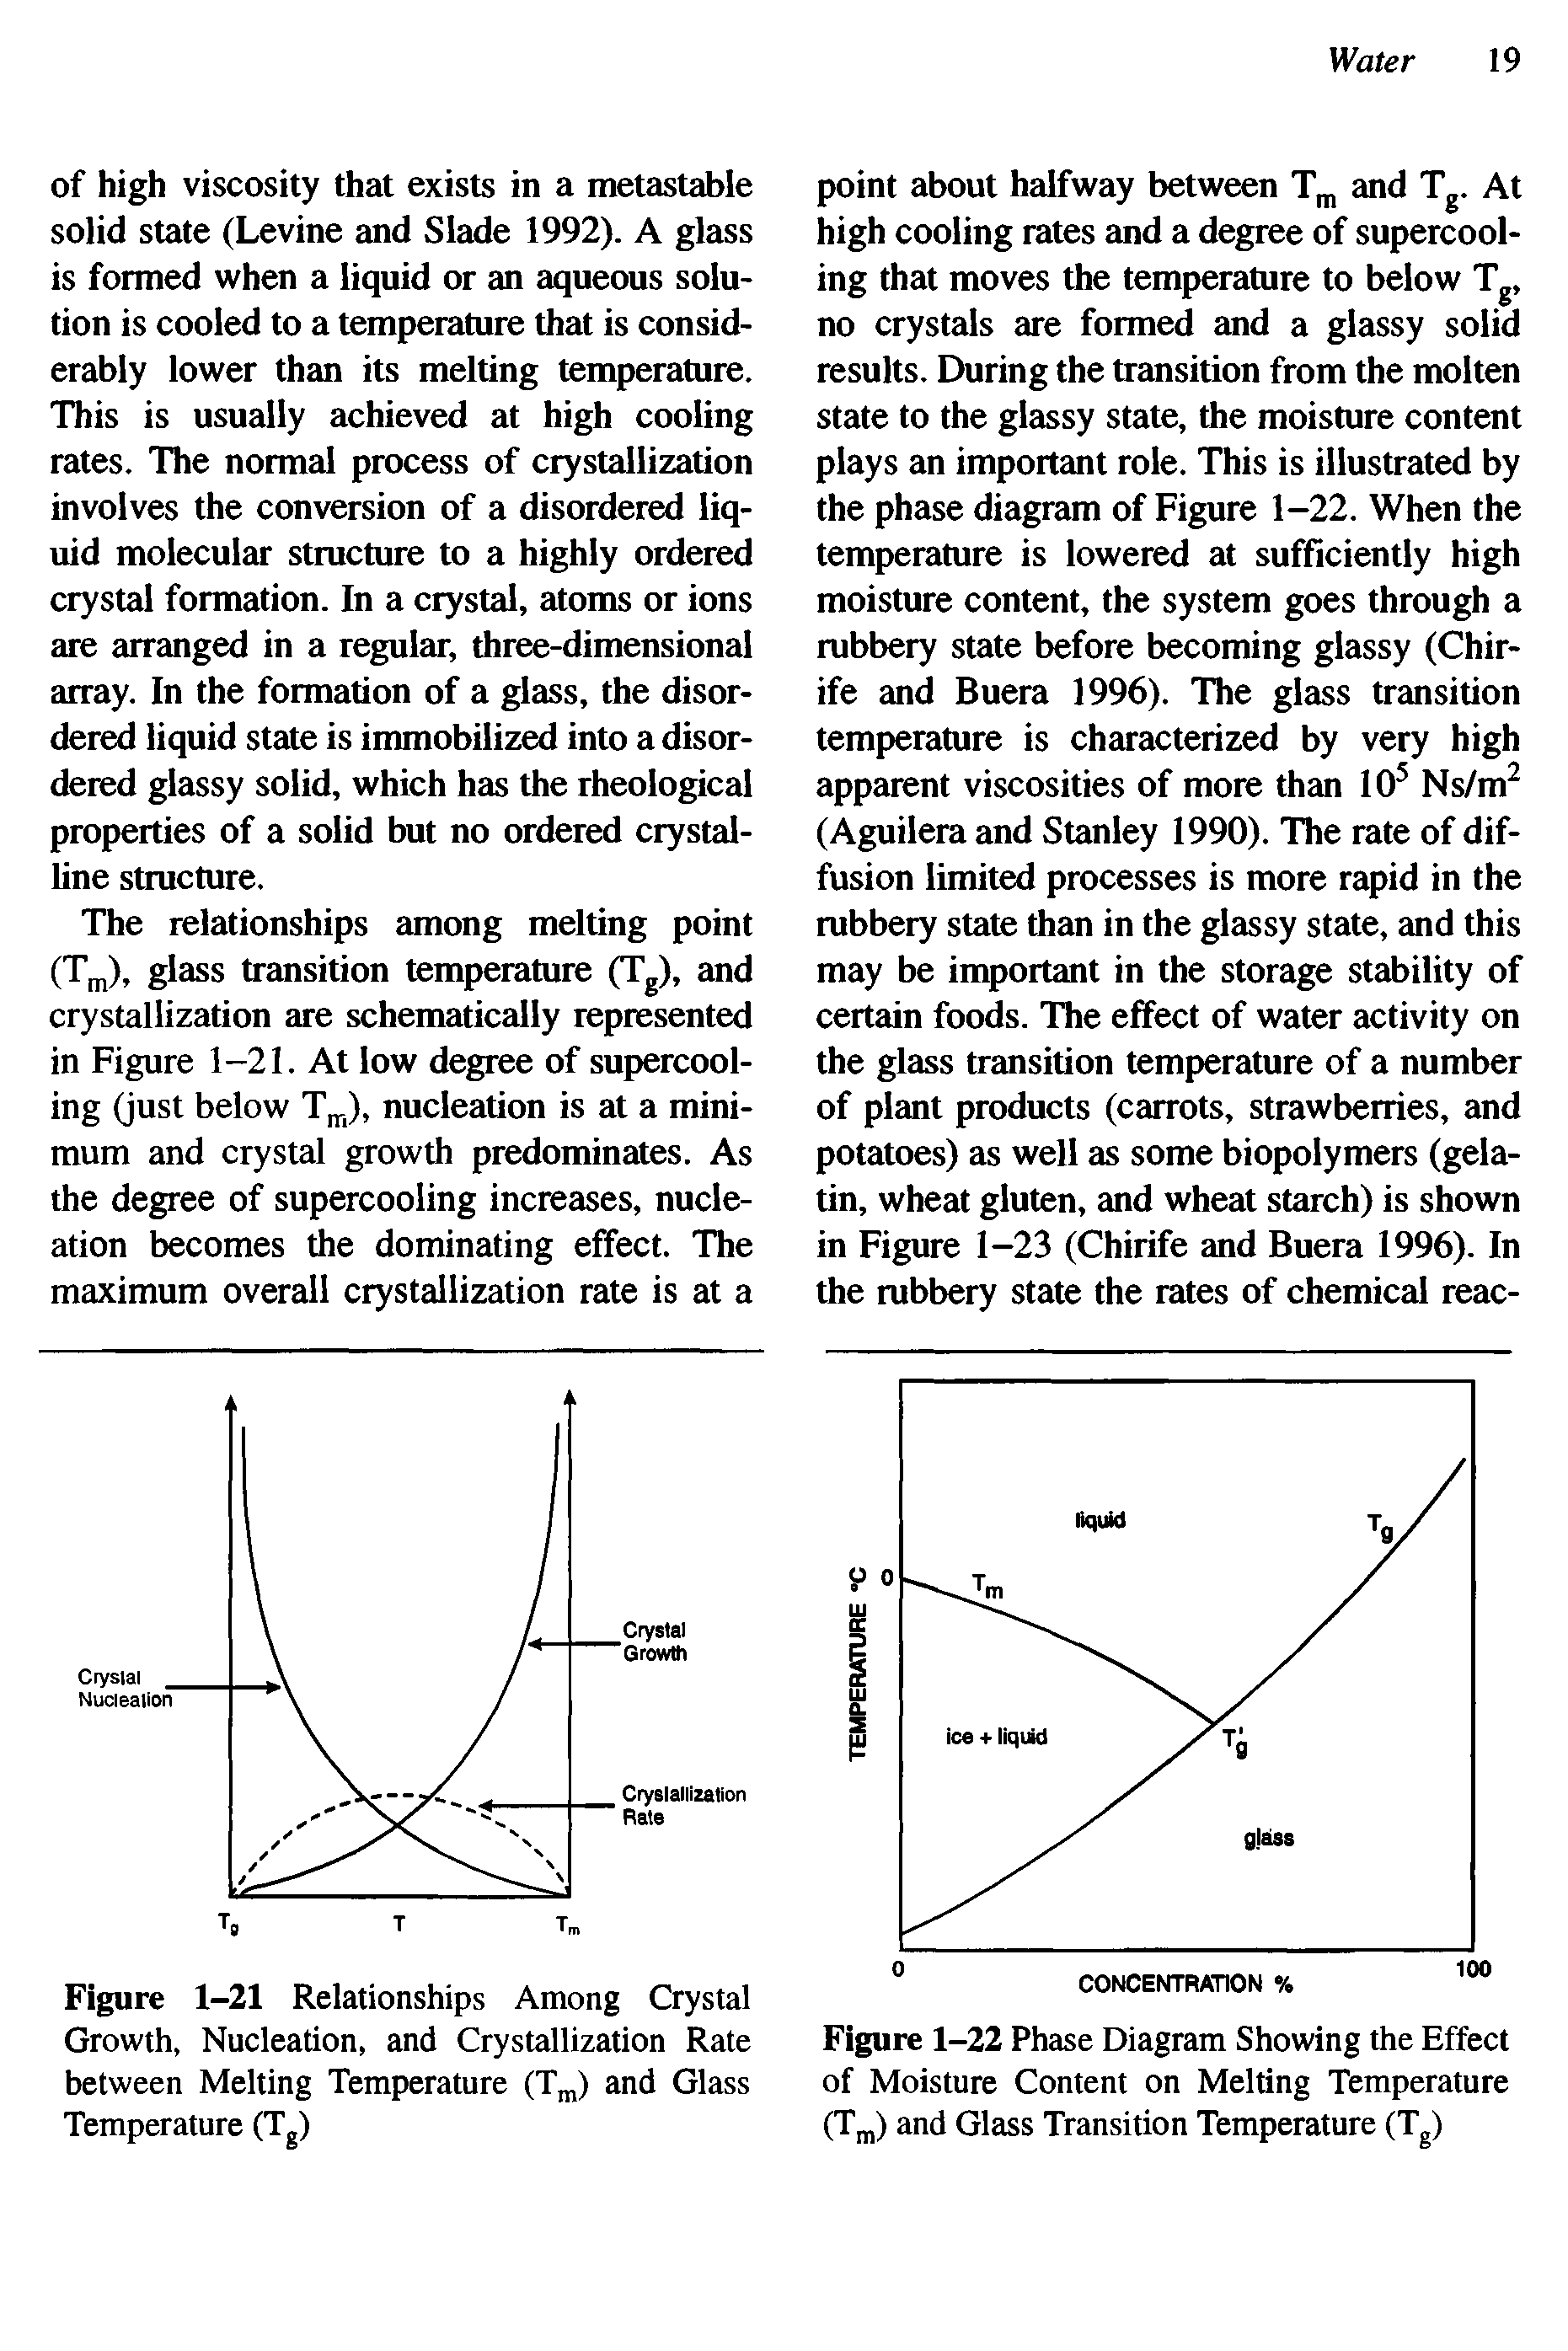 Figure 1-21 Relationships Among Crystal Growth, Nucleation, and Crystallization Rate between Melting Temperature (Tm) and Glass Temperature (Tg)...